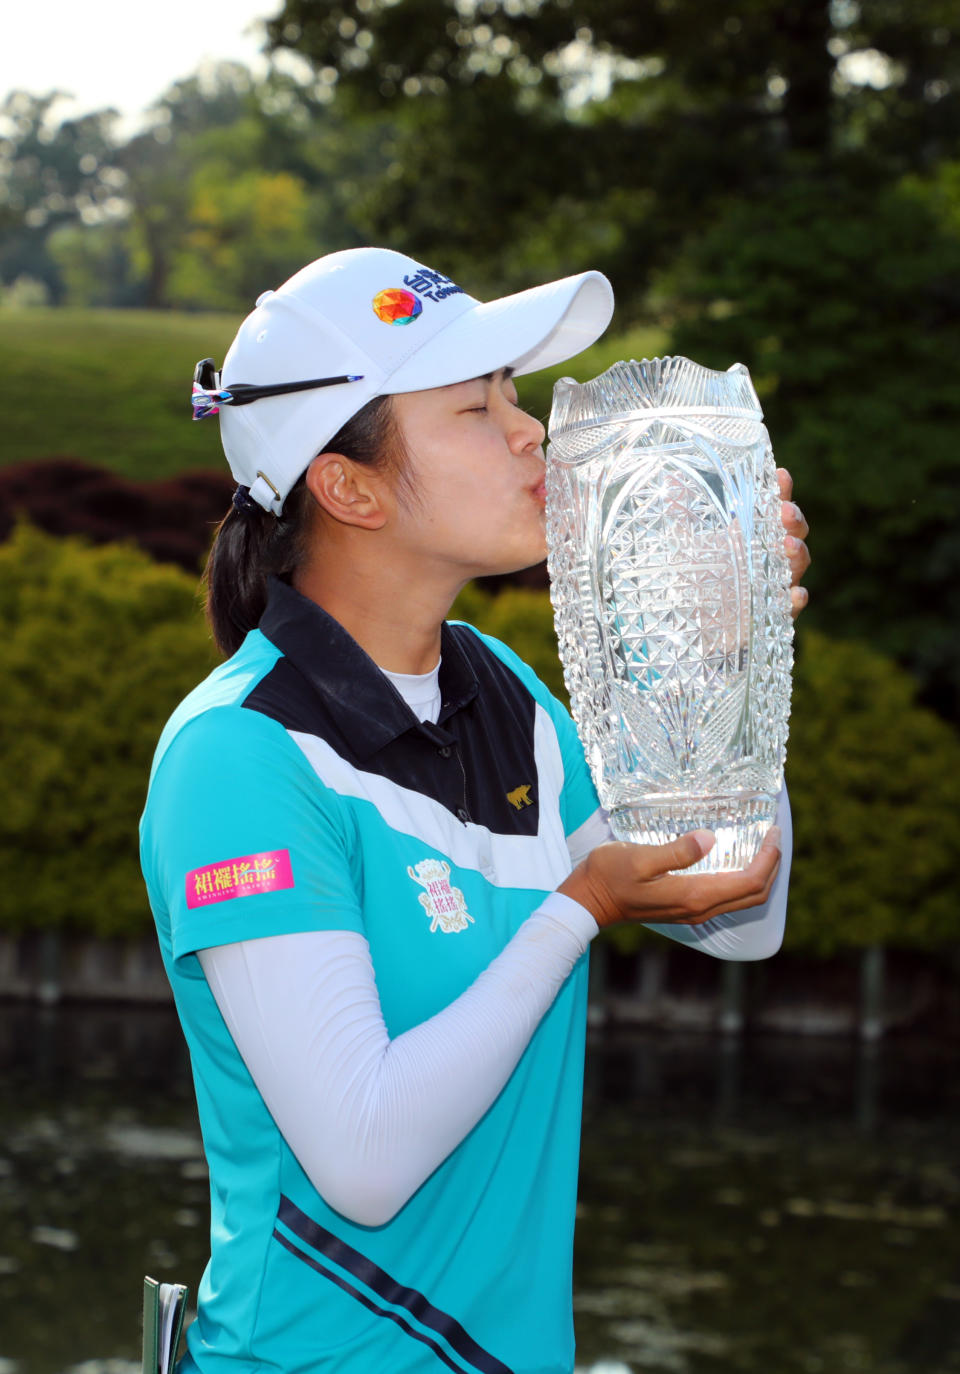 WILLIAMSBURG, VA - MAY 23: Wei-Ling Hsu of Chinese Taipei kisses the championship trophy after winning the Pure Silk Championship presented by Visit Williamsburg on the River Course at Kingsmill Resort on May 23, 2021 in Williamsburg, Virginia. (Photo by Hunter Martin/Getty Images)